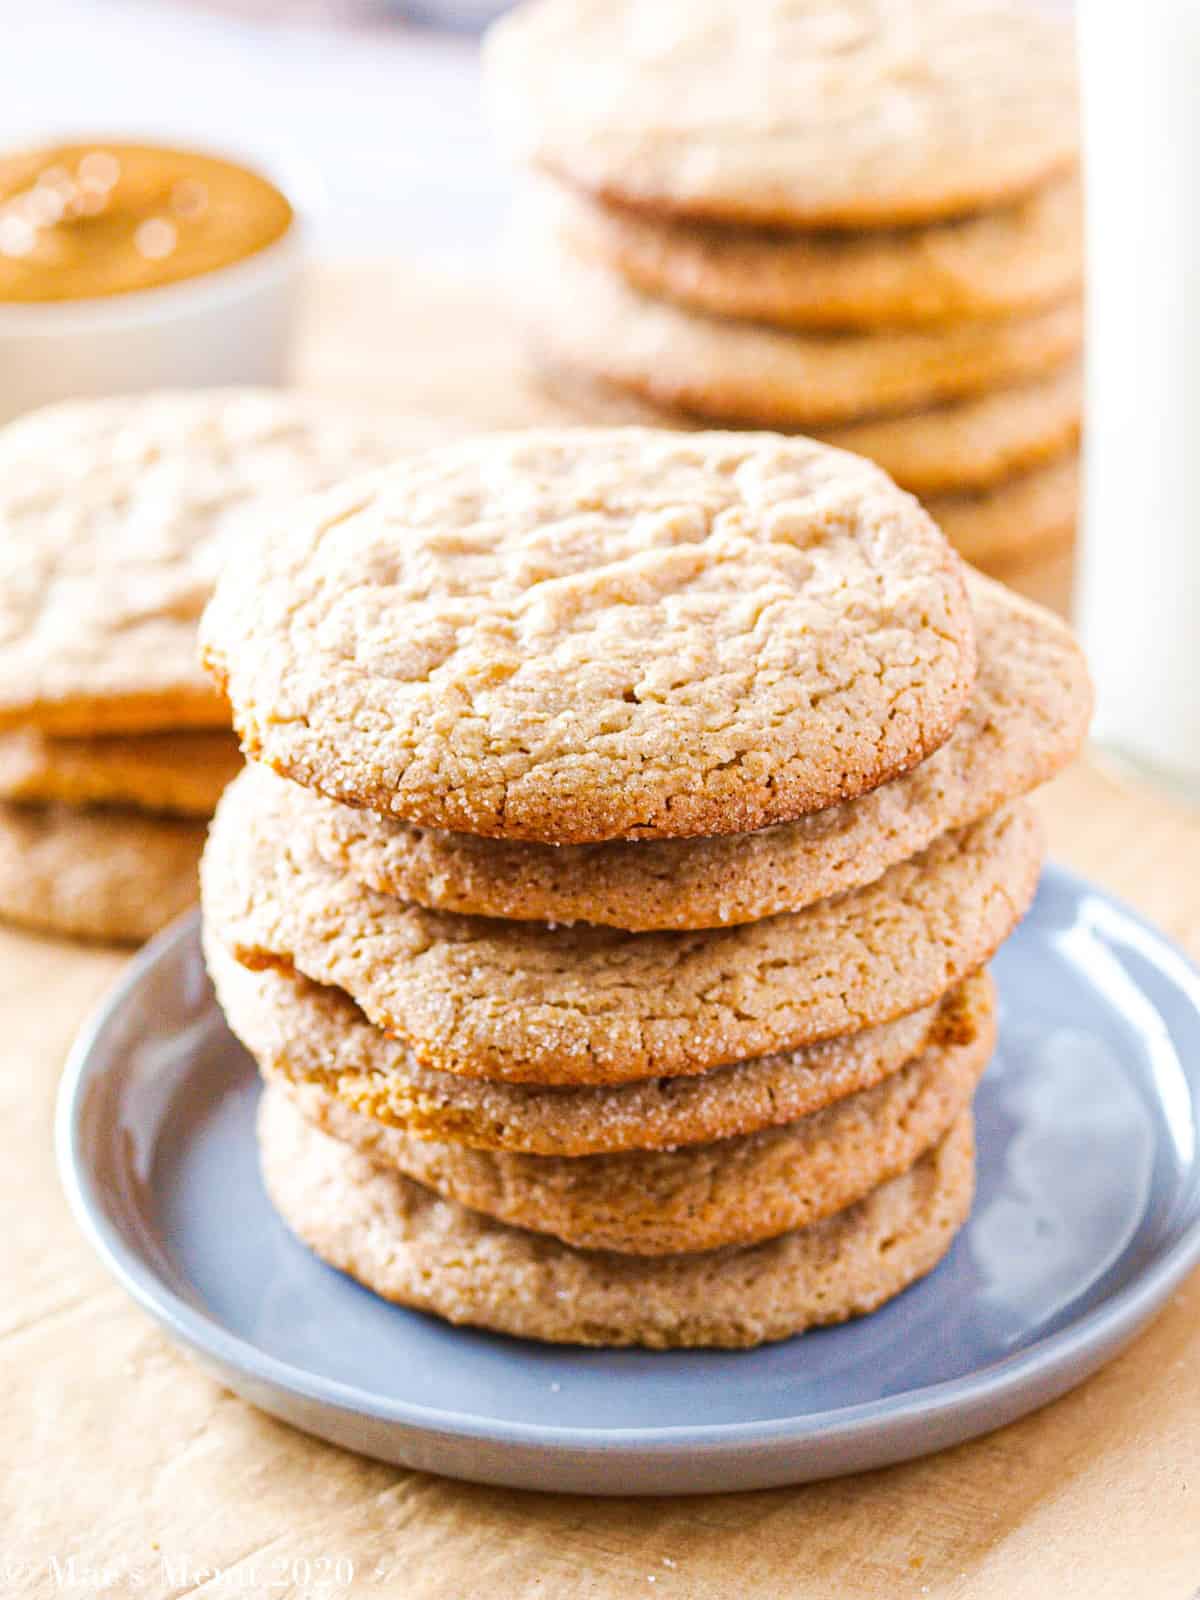 A large stack of whole wheat peanut butter cookies on a small smoky blue plate